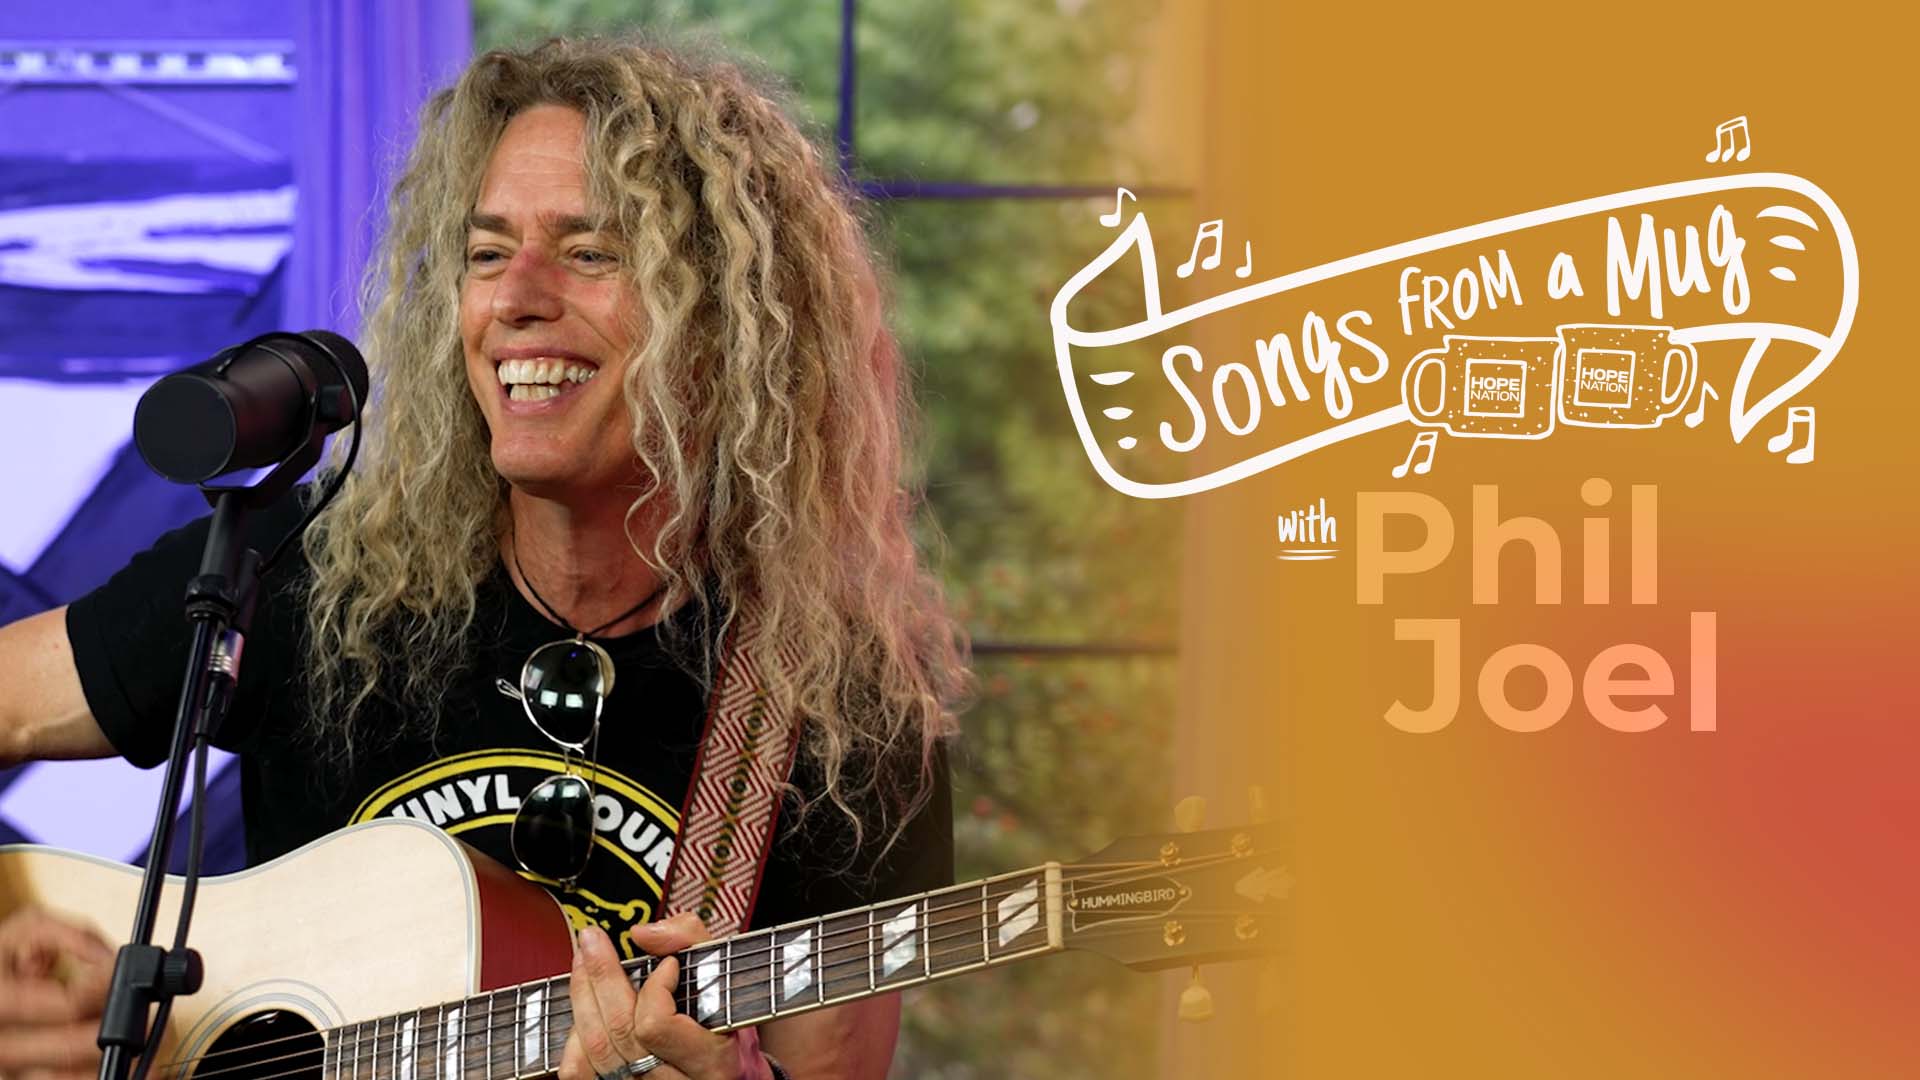 Phil Joel Sings Classic Newsboys, Led Zeppelin, U2, and Coldplay | Songs From a Mug